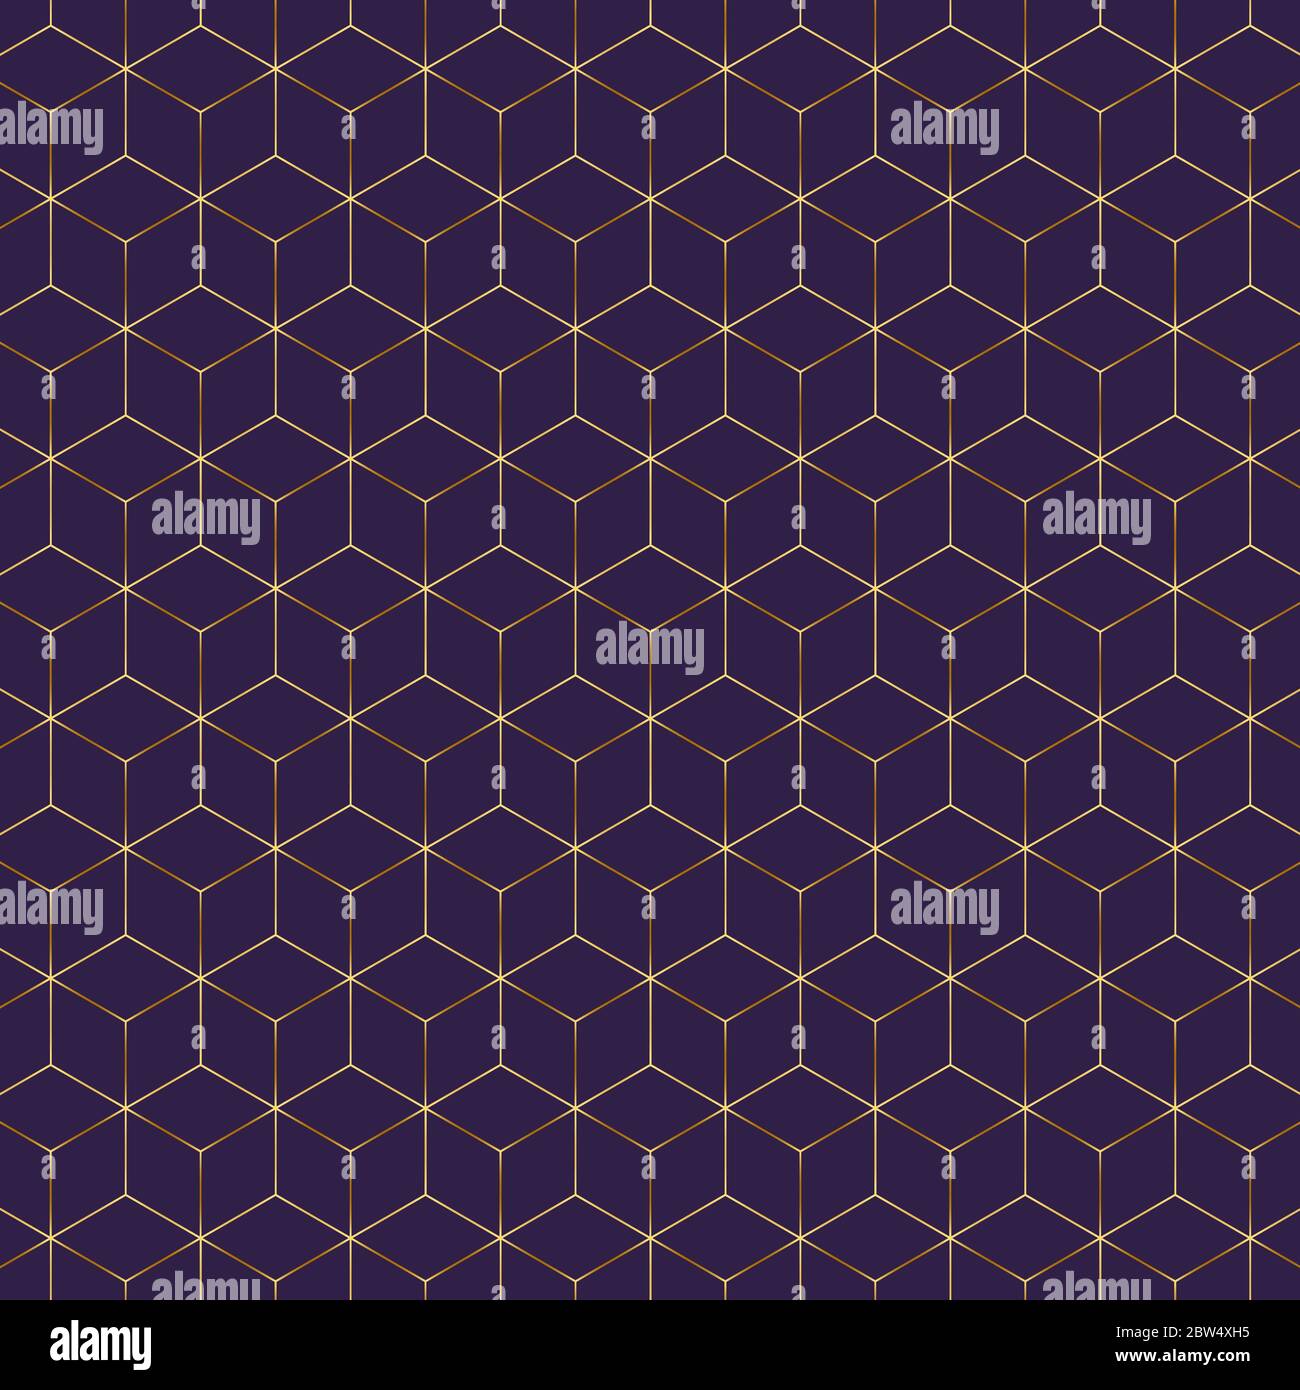 Elegant seamless pattern with golden metallic hexagons on violet indigo background. Repeat geometric vector pattern with isometric cubes for interior Stock Vector